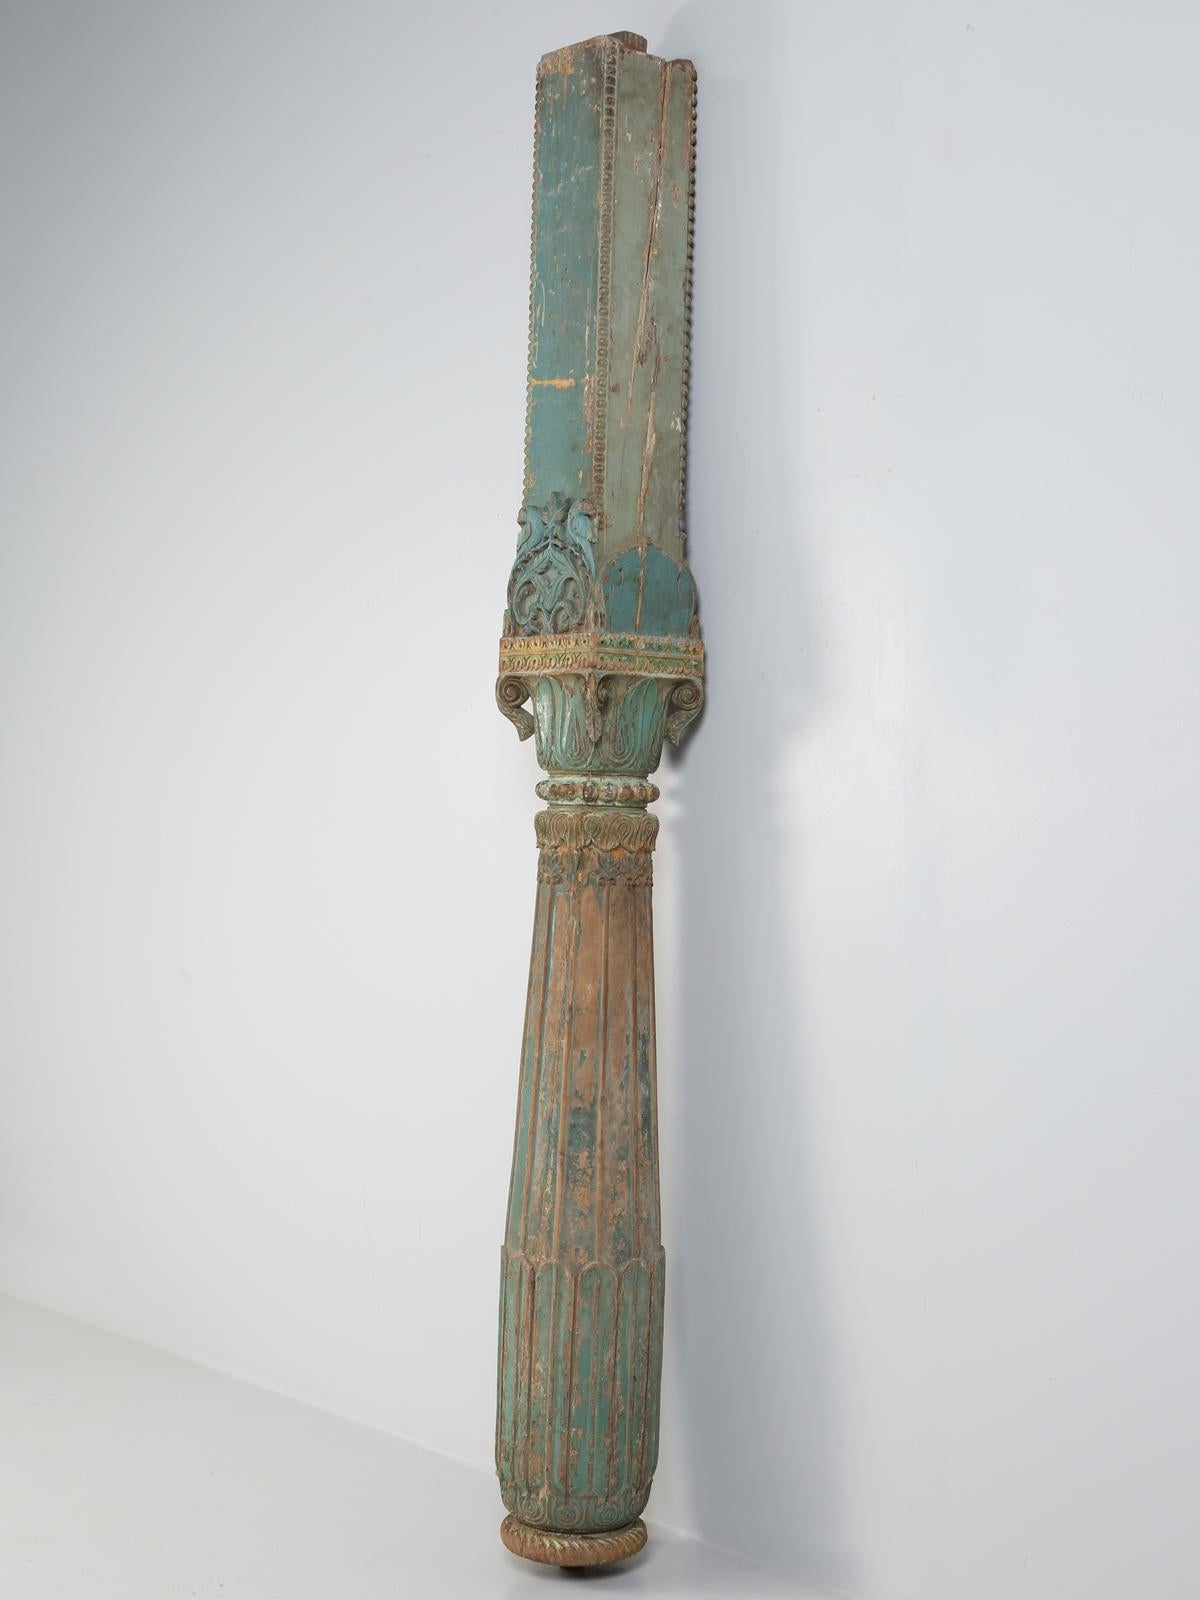 Anglo-Indian Antique Teakwood Column from India, circa 1800s